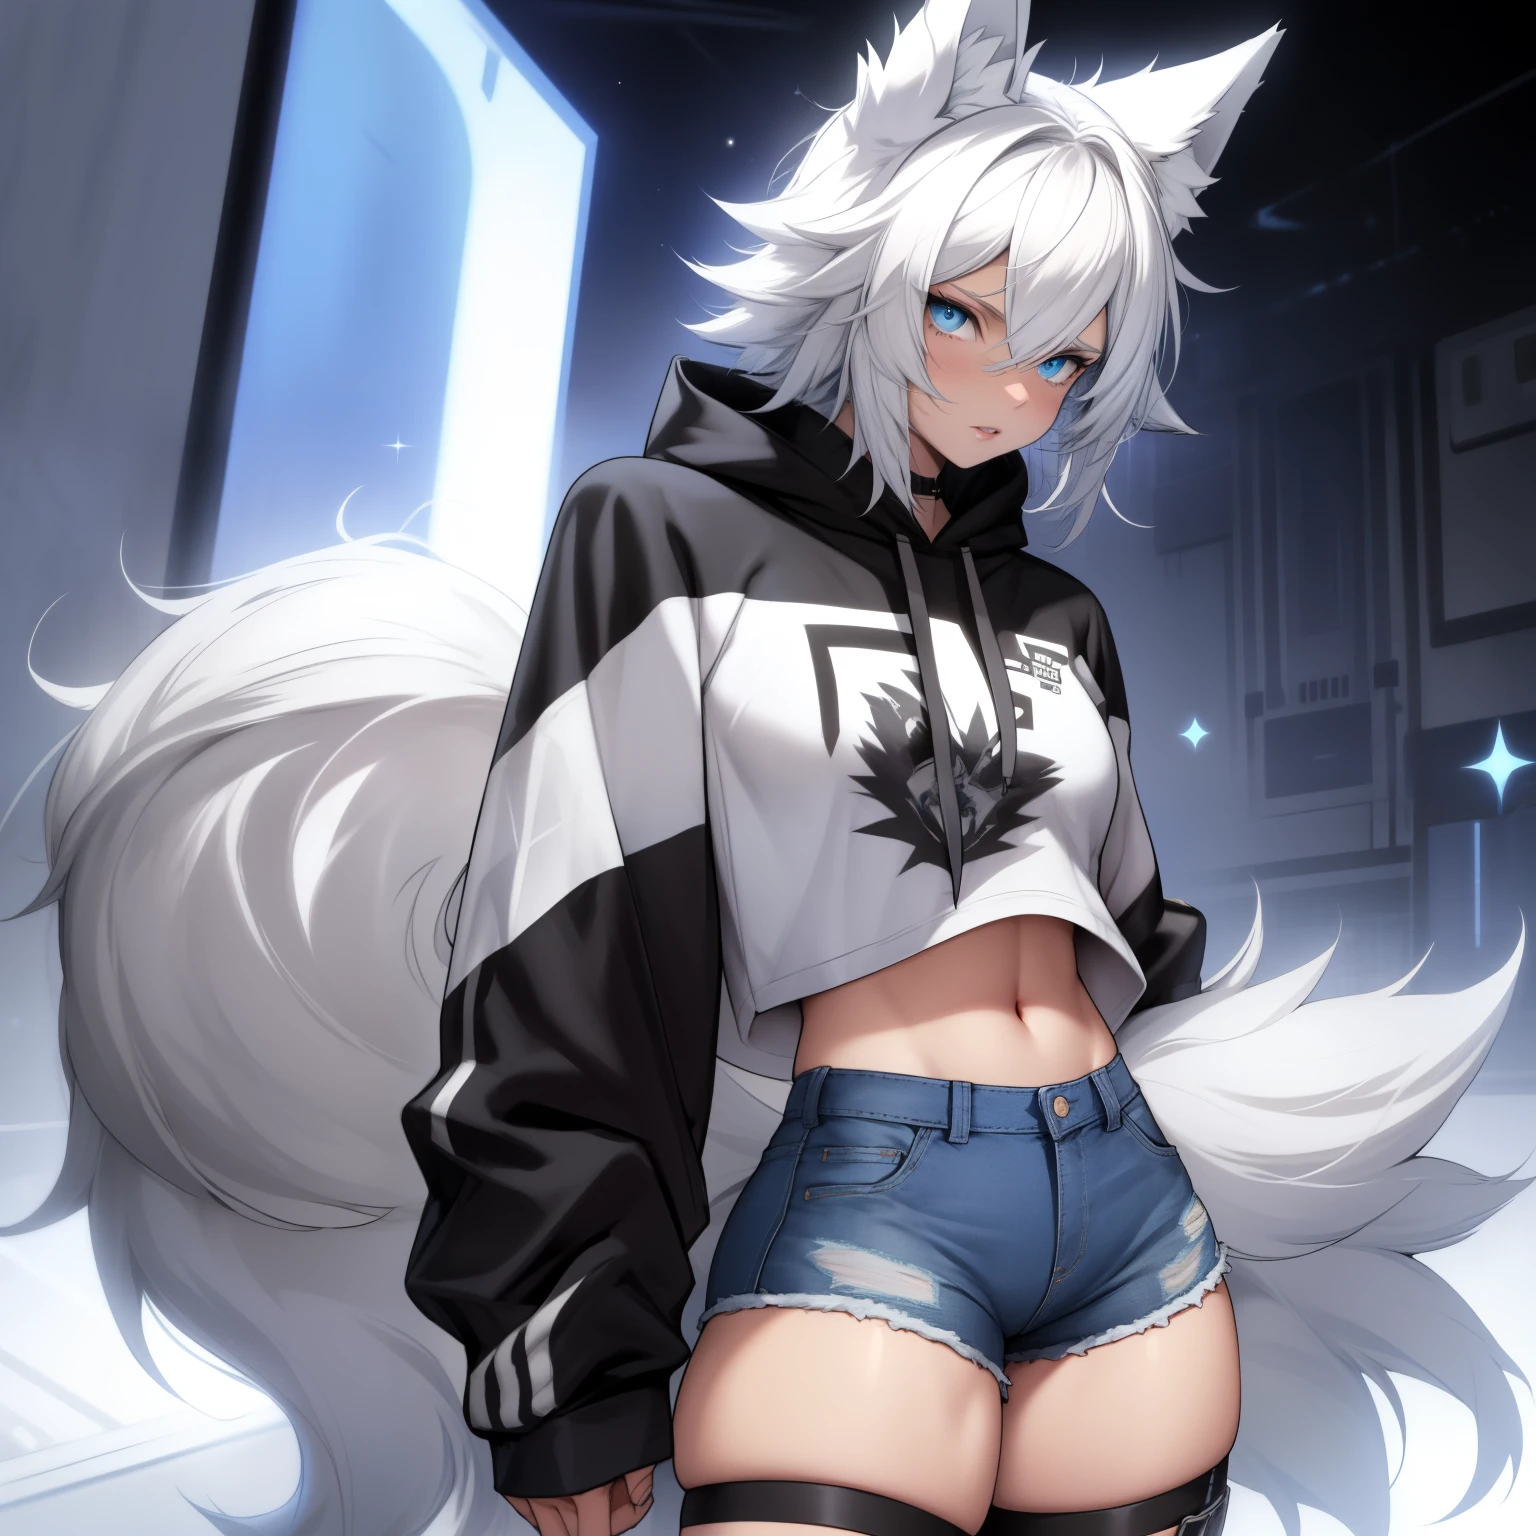 Single boy, Anime Femboy, Short, Long white hair, wolf ears, wolf tail, blue eyes, wearing short denim shorts, thigh high fishnets, black combat boots,wearing cropped fur lined hoodie, flat chest, super flat chest, wearing cropped t-shirt, solo femboy, only one femboy ((FLAT CHEST)) solo, alone, (SOLO)(ALONE) thicc thighs, wide hips, blue eyes, perfect eyes, perfect face, pouty lips, happy, curvy, sparkly blue eyes, from behind, nice big butt